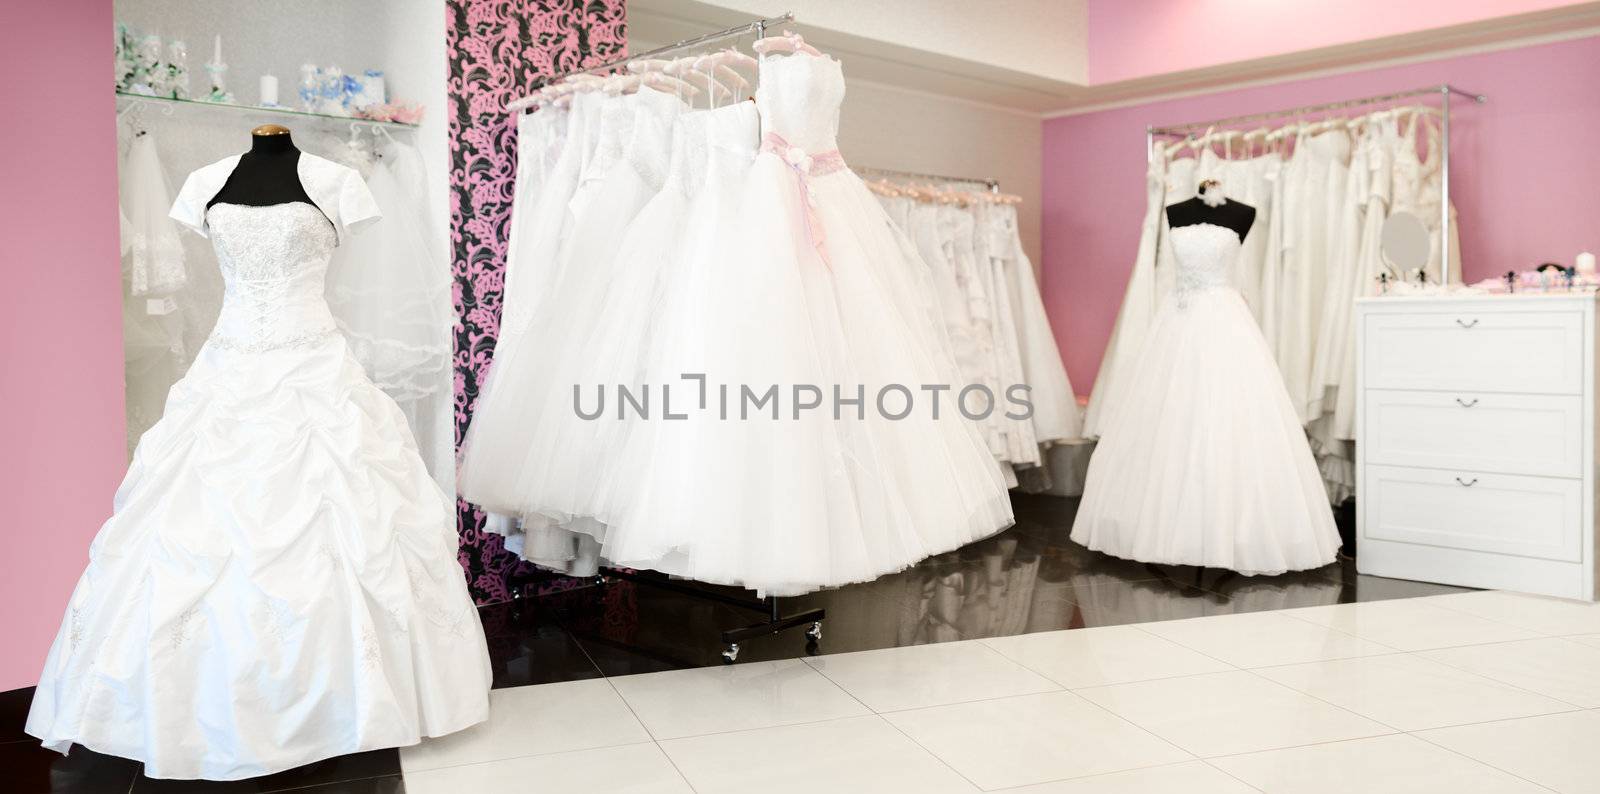 Wedding store panorama. Shallow depth of field. White bridal dresses. Artificial flowers and different stuff on glass shelfs